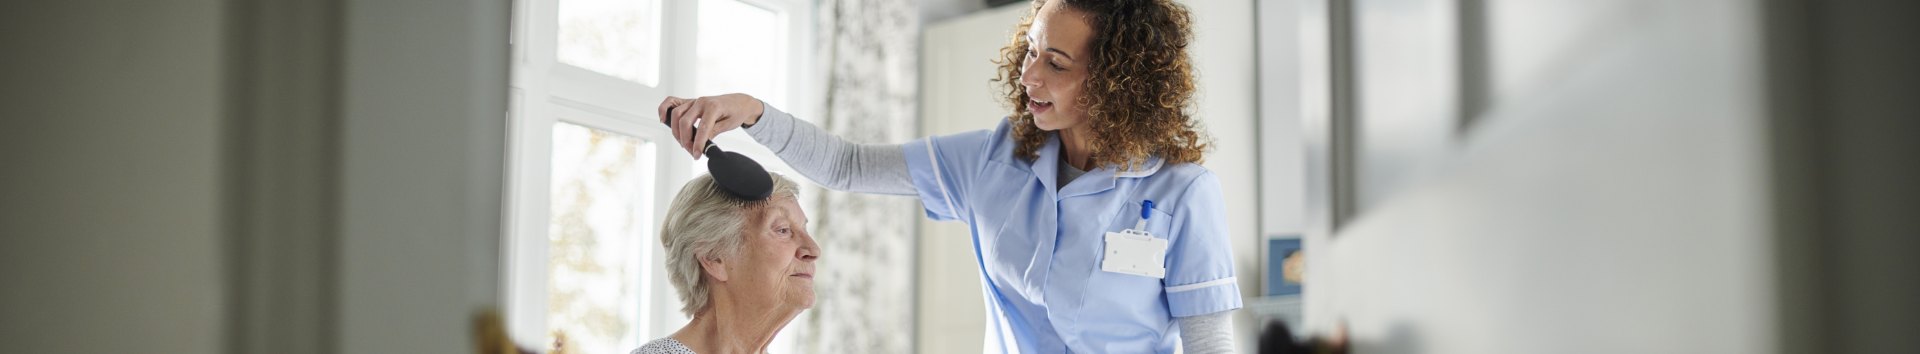 Skilled Nursing Services & Residential Care